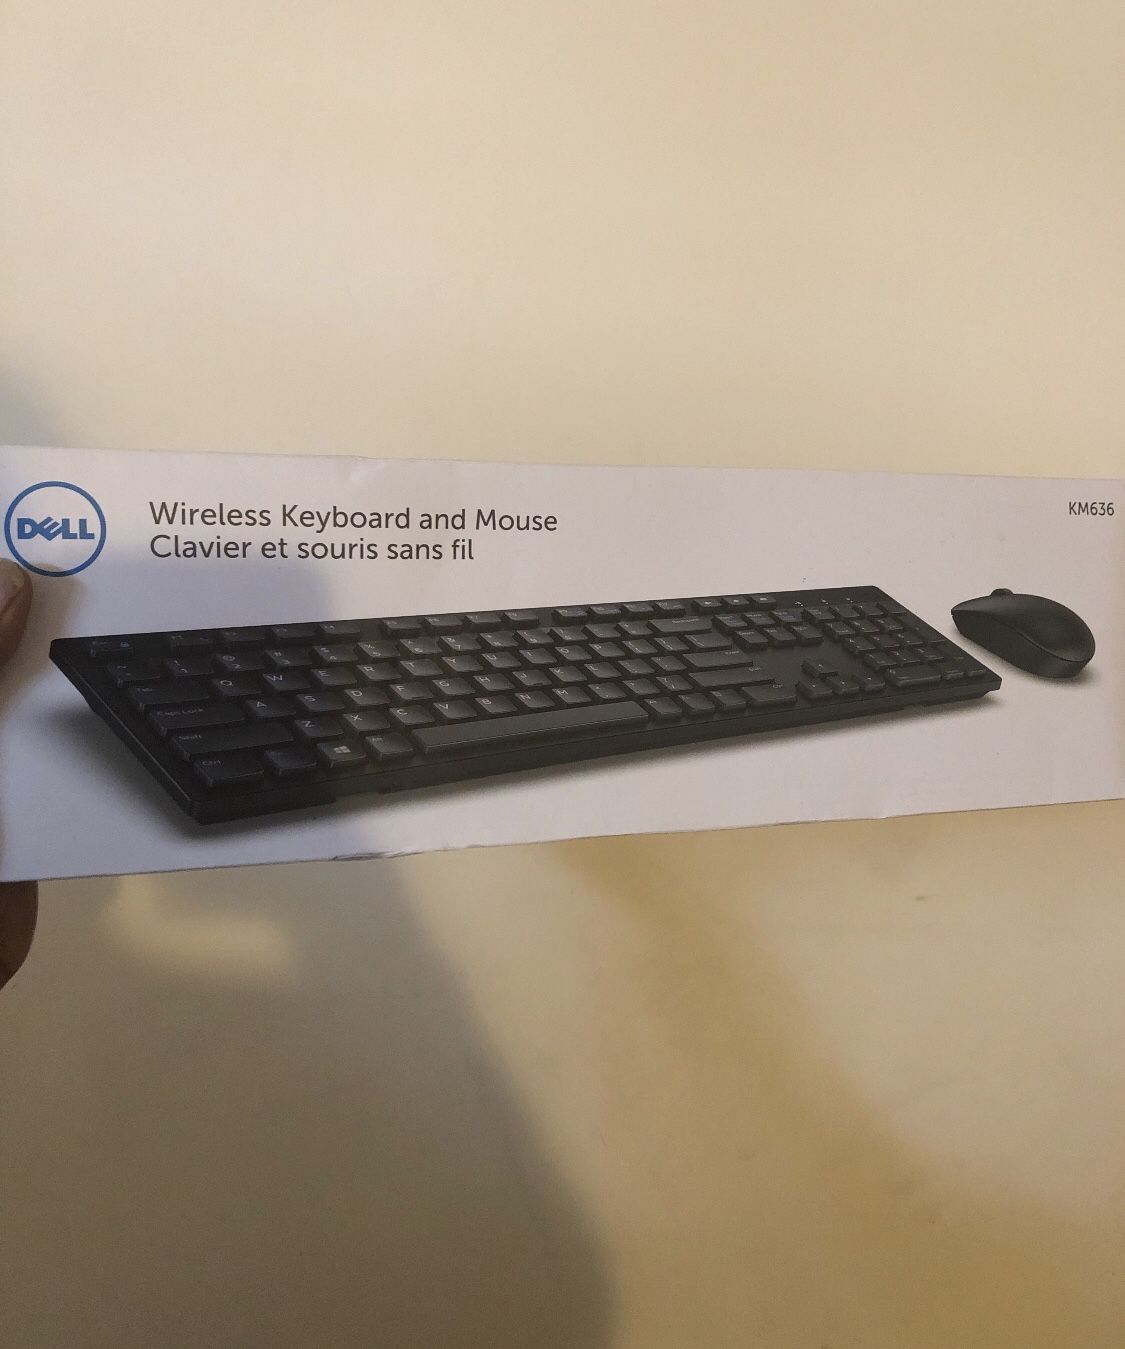 “Dell” Wireless Keyboard And Mouse